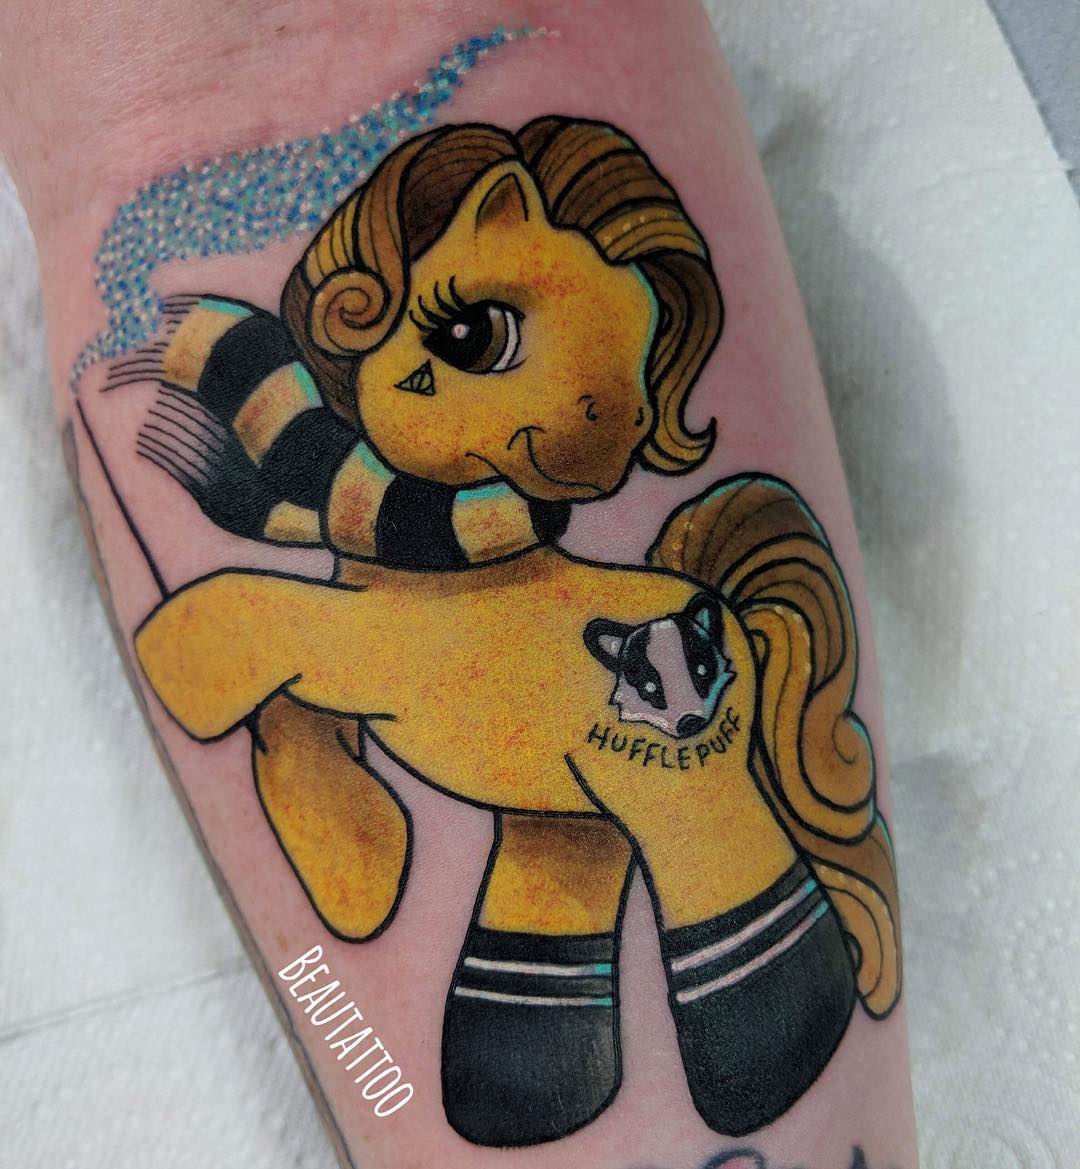 Funny Little Pony Tattoo On Arm